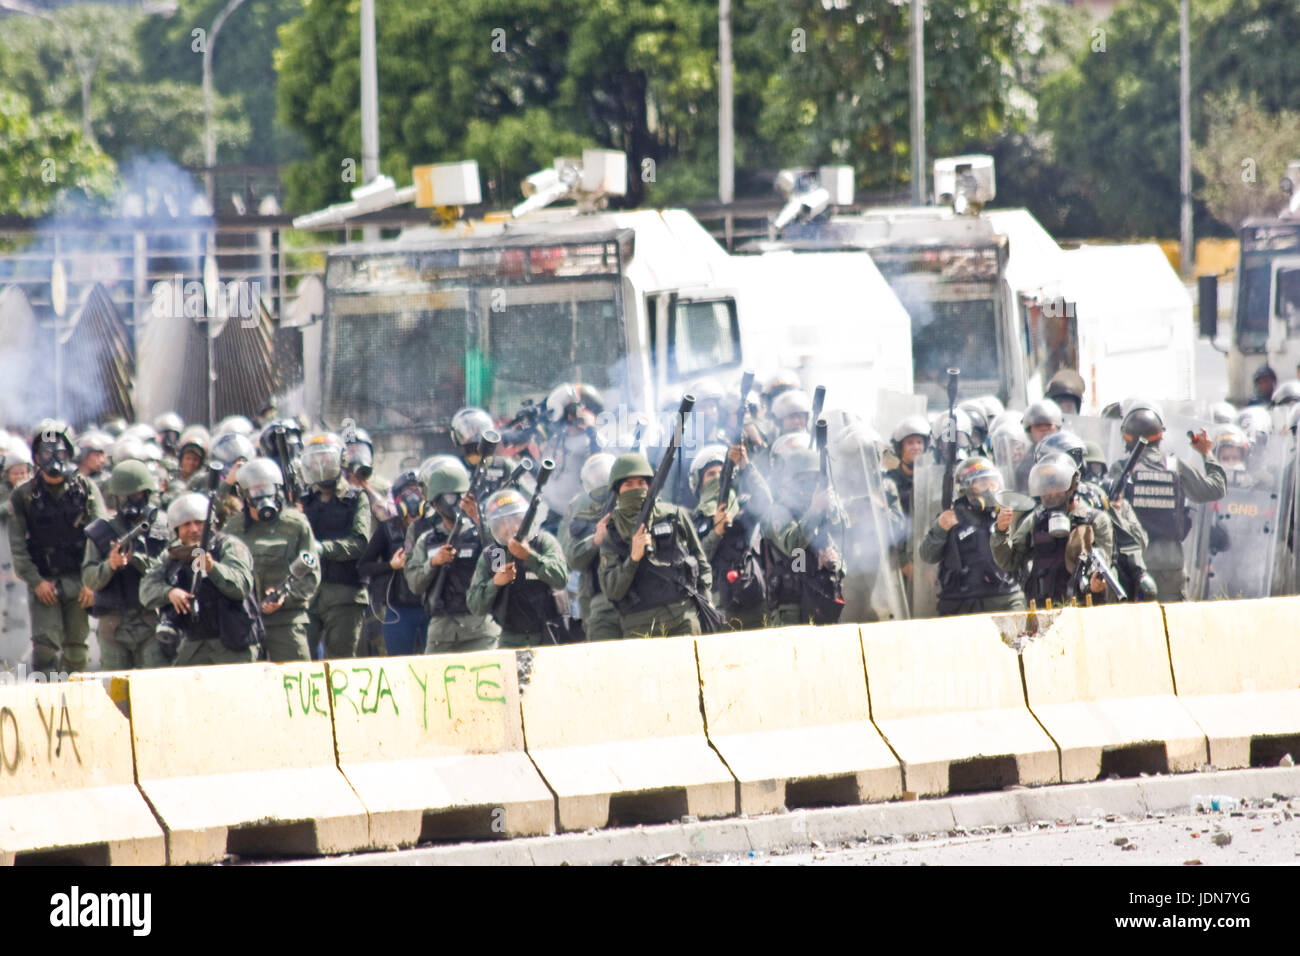 Members of the Bolivarian National Guard open fire against demonstrators during a protest against the government of Nicolas Maduro in Caracas. Stock Photo